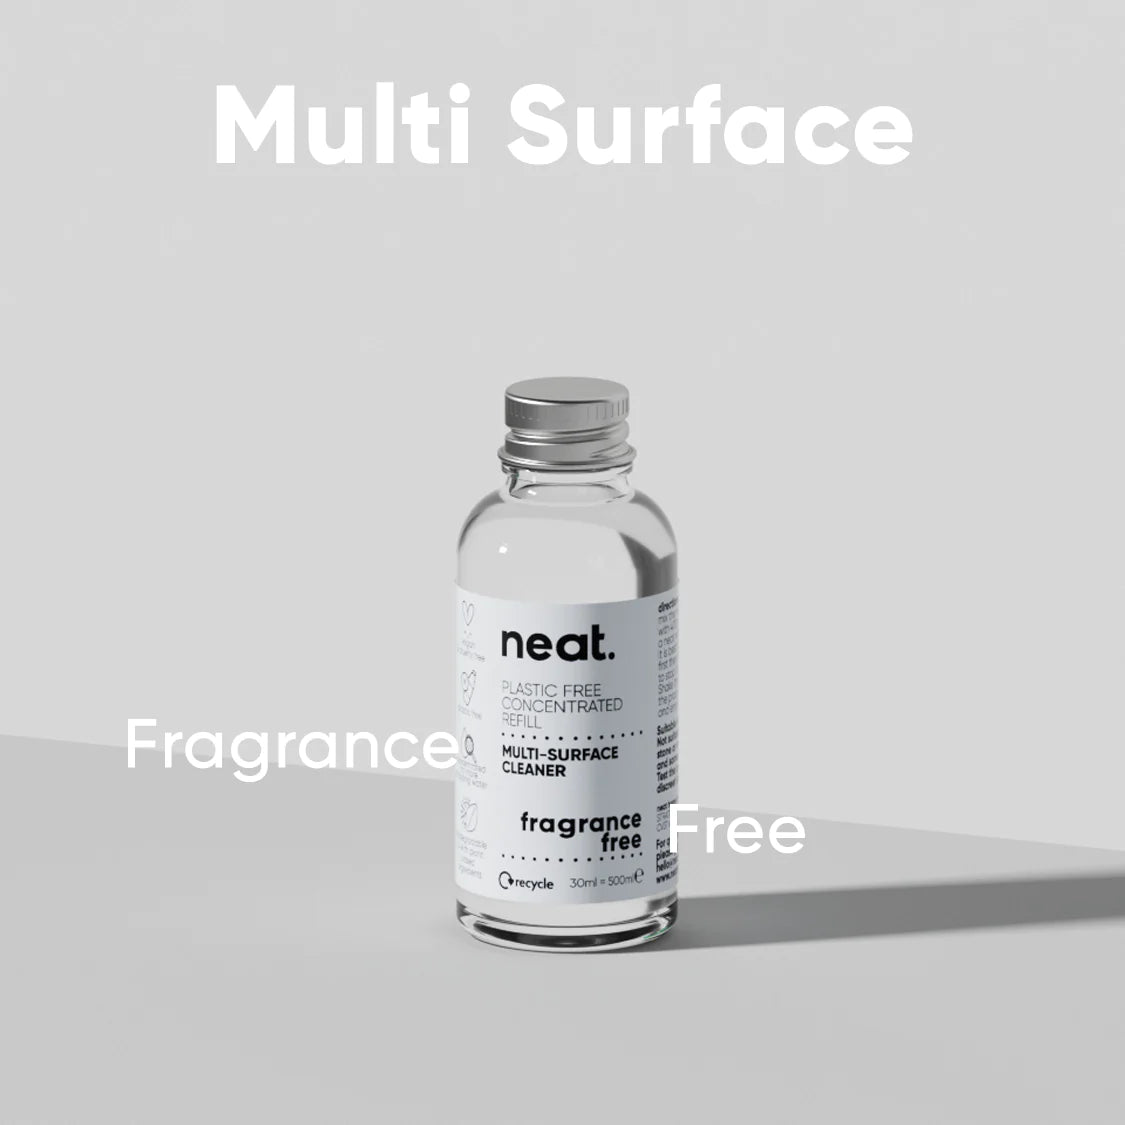 NEAT Anti-Bacterial Multi-Surface Cleaner Concentrated Refill - Fragrance Free